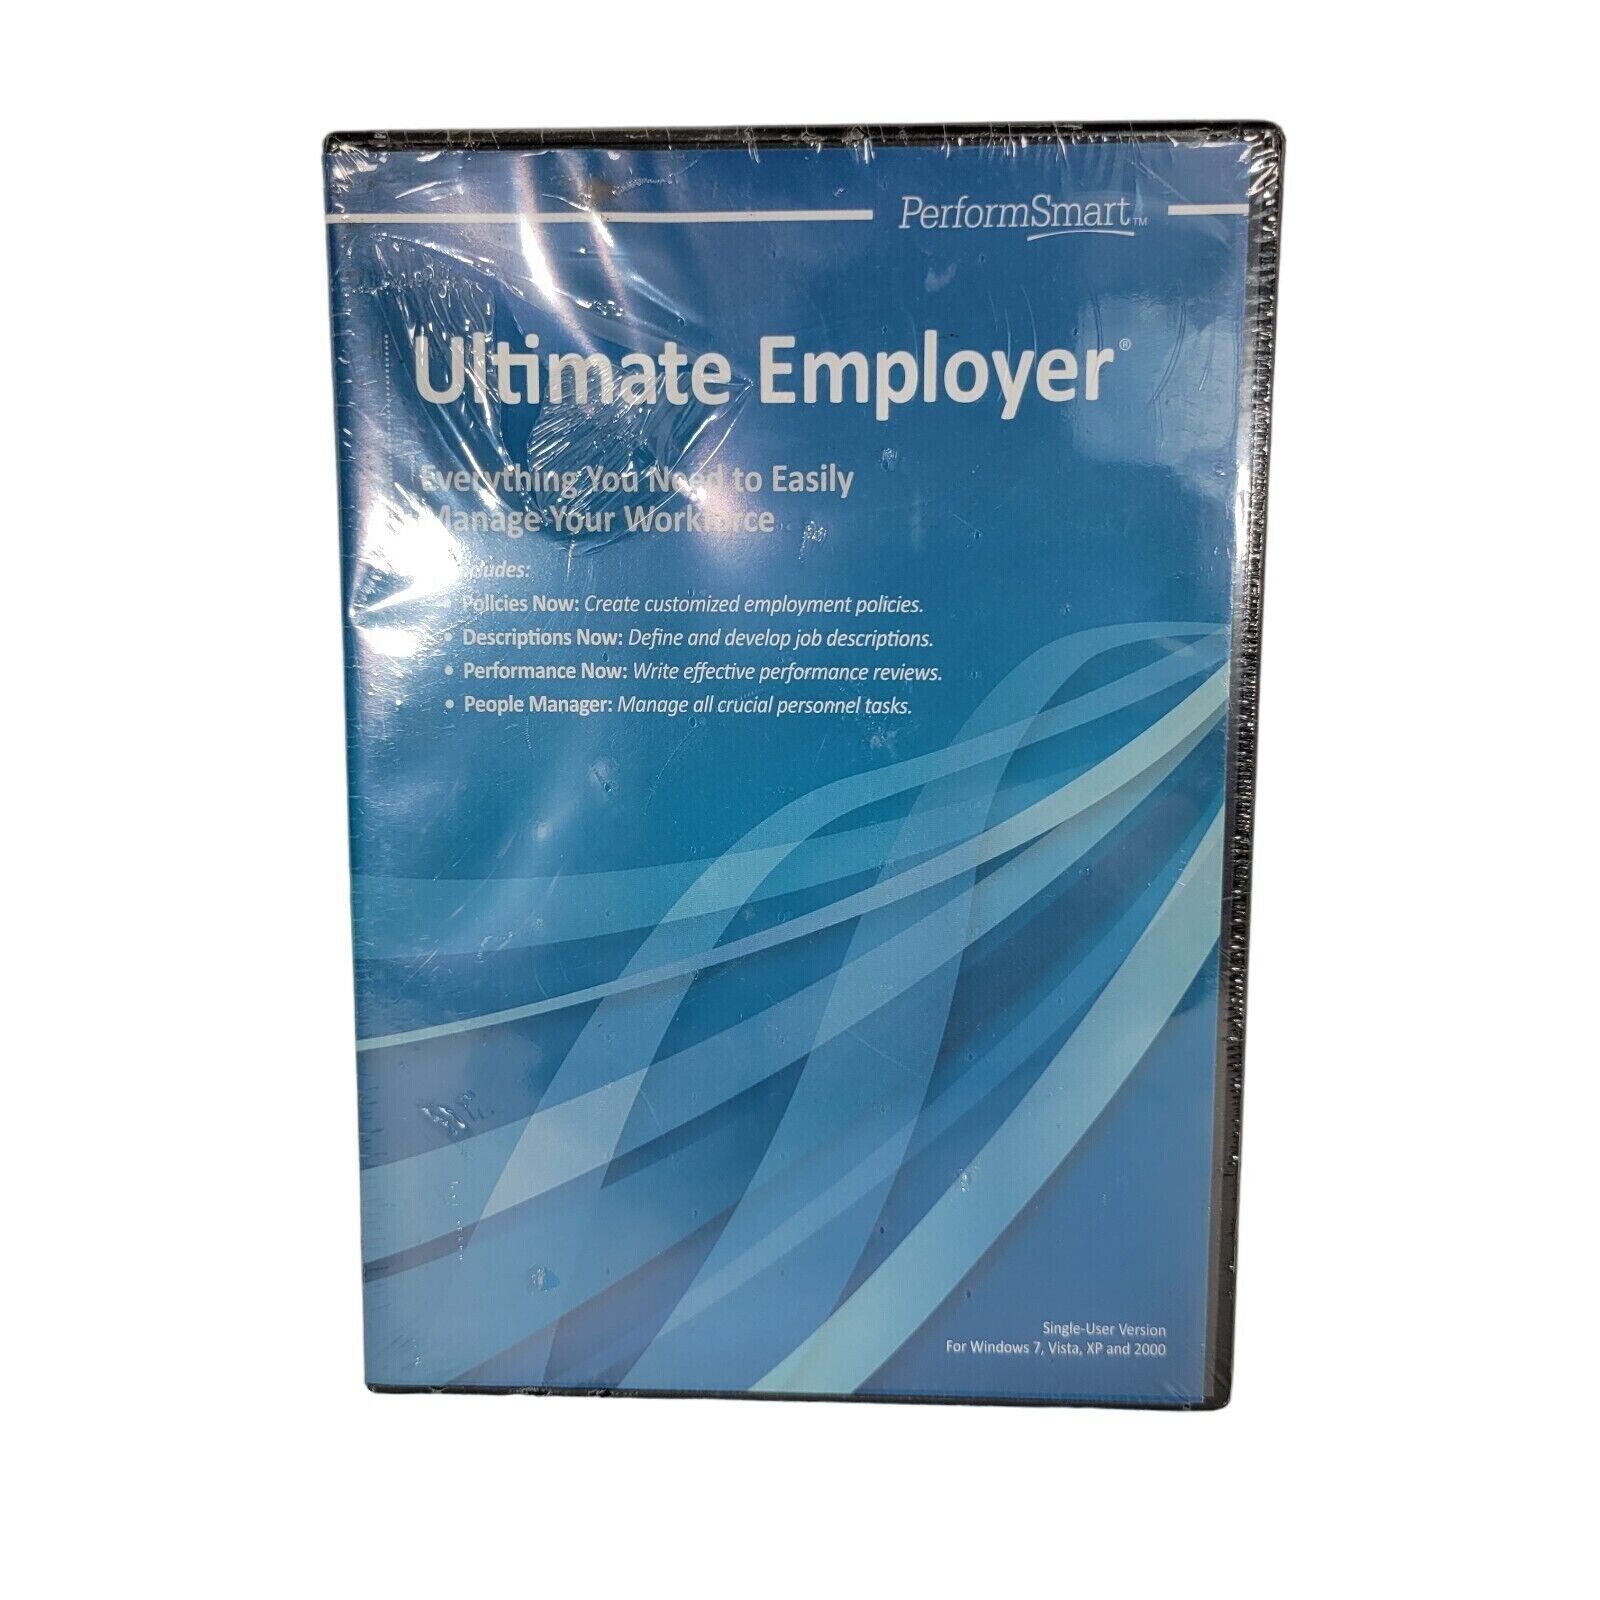 Ultimate Employer Workforce Management Software by Administaff CD-ROM HR Tools